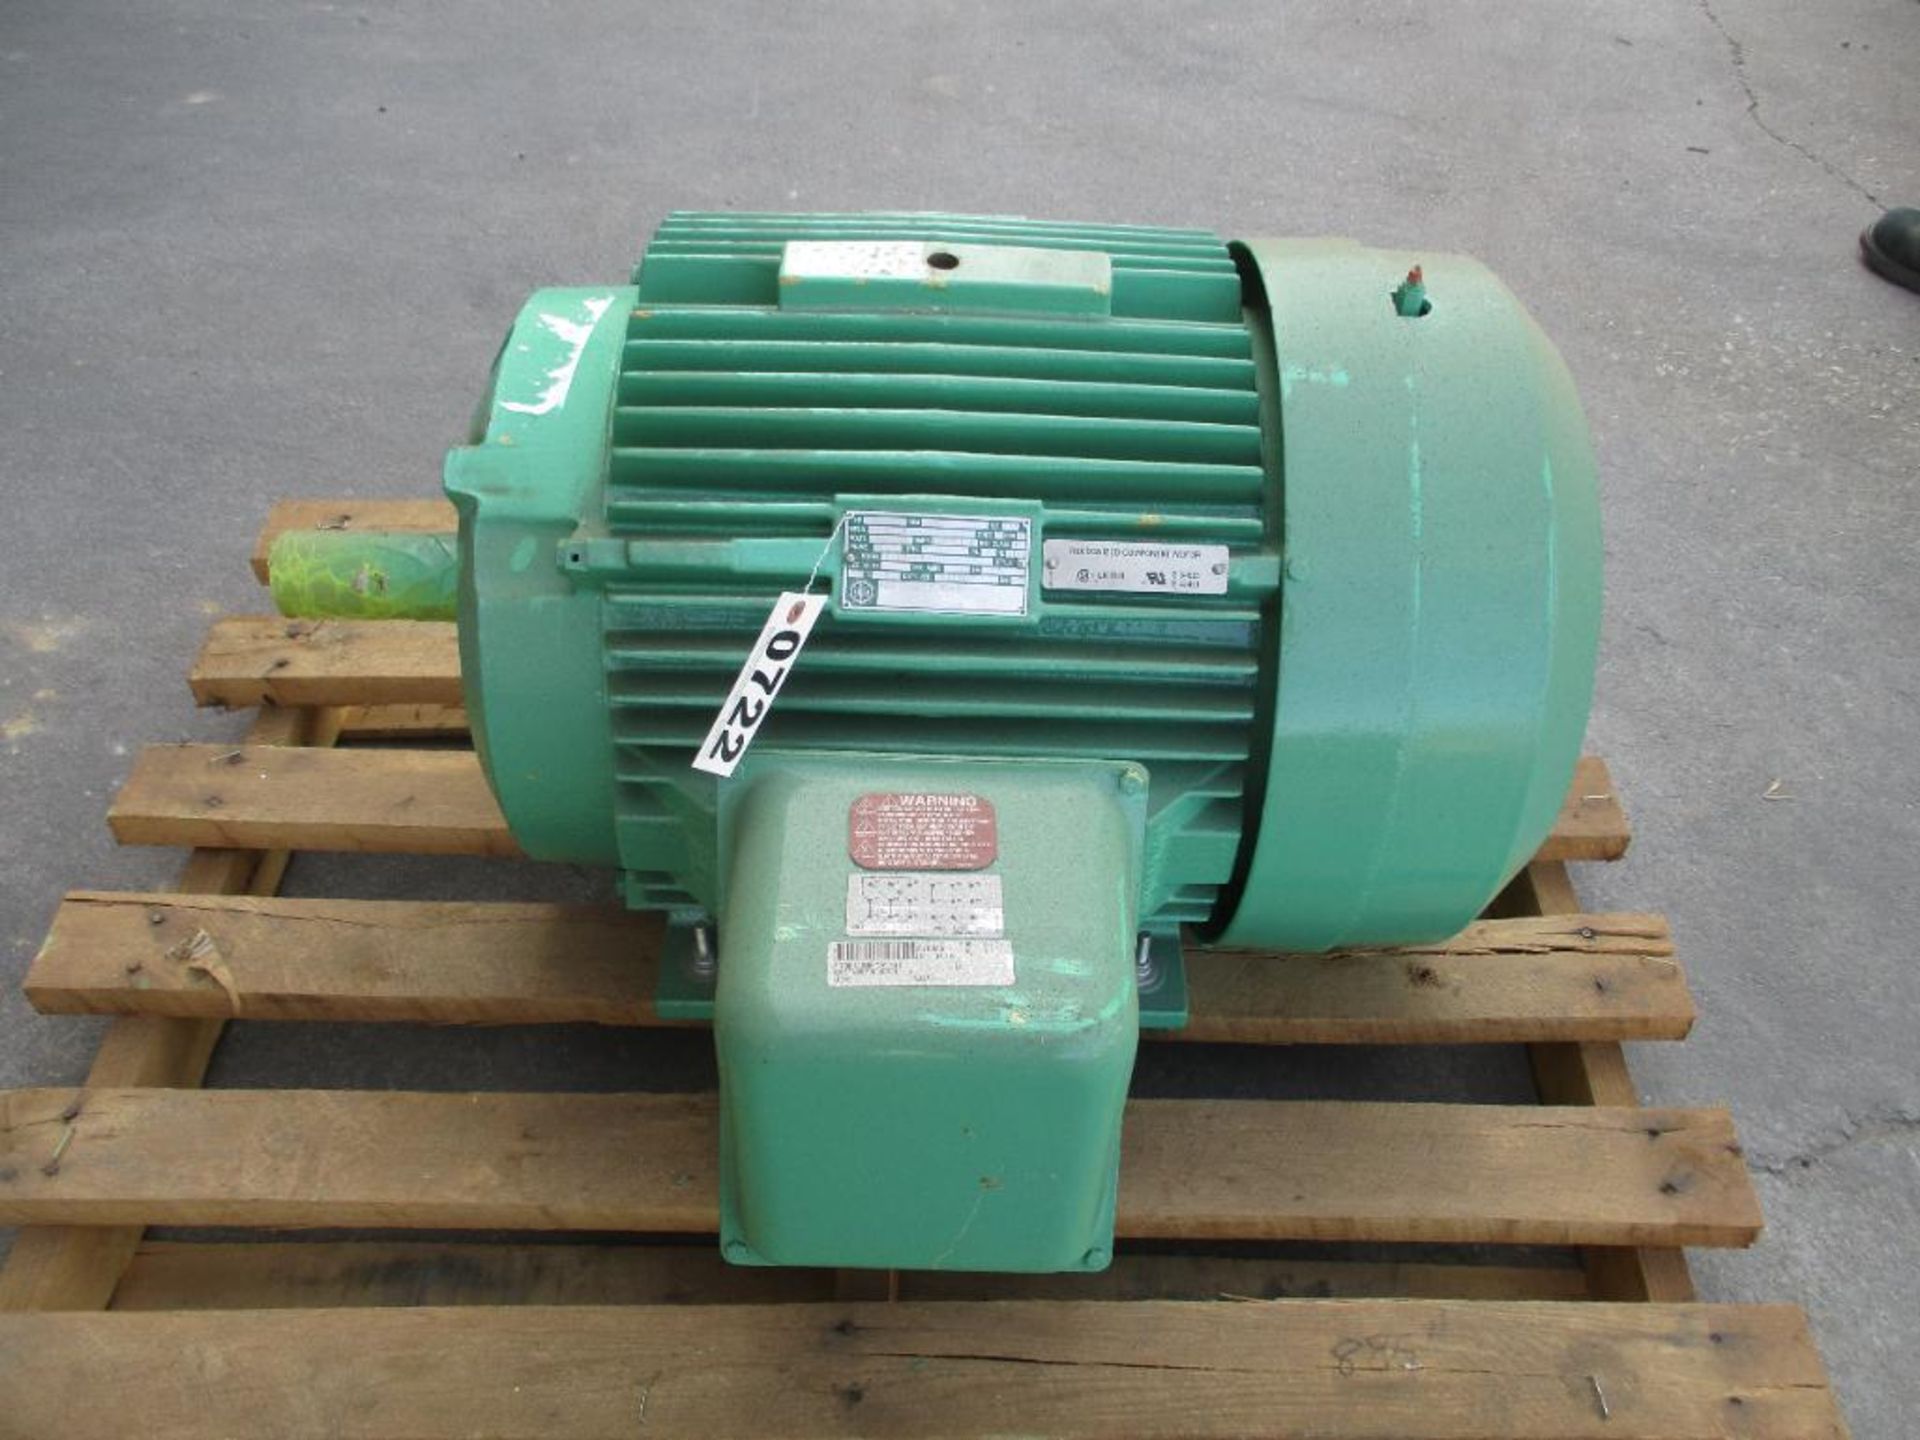 BALDOR 3 PHASE 60HP 1800RPM 364T FRAME A/C MOTOR P/N EM4314T 885# LBS (THIS LOT IS FOB KNOXVILLE TN)